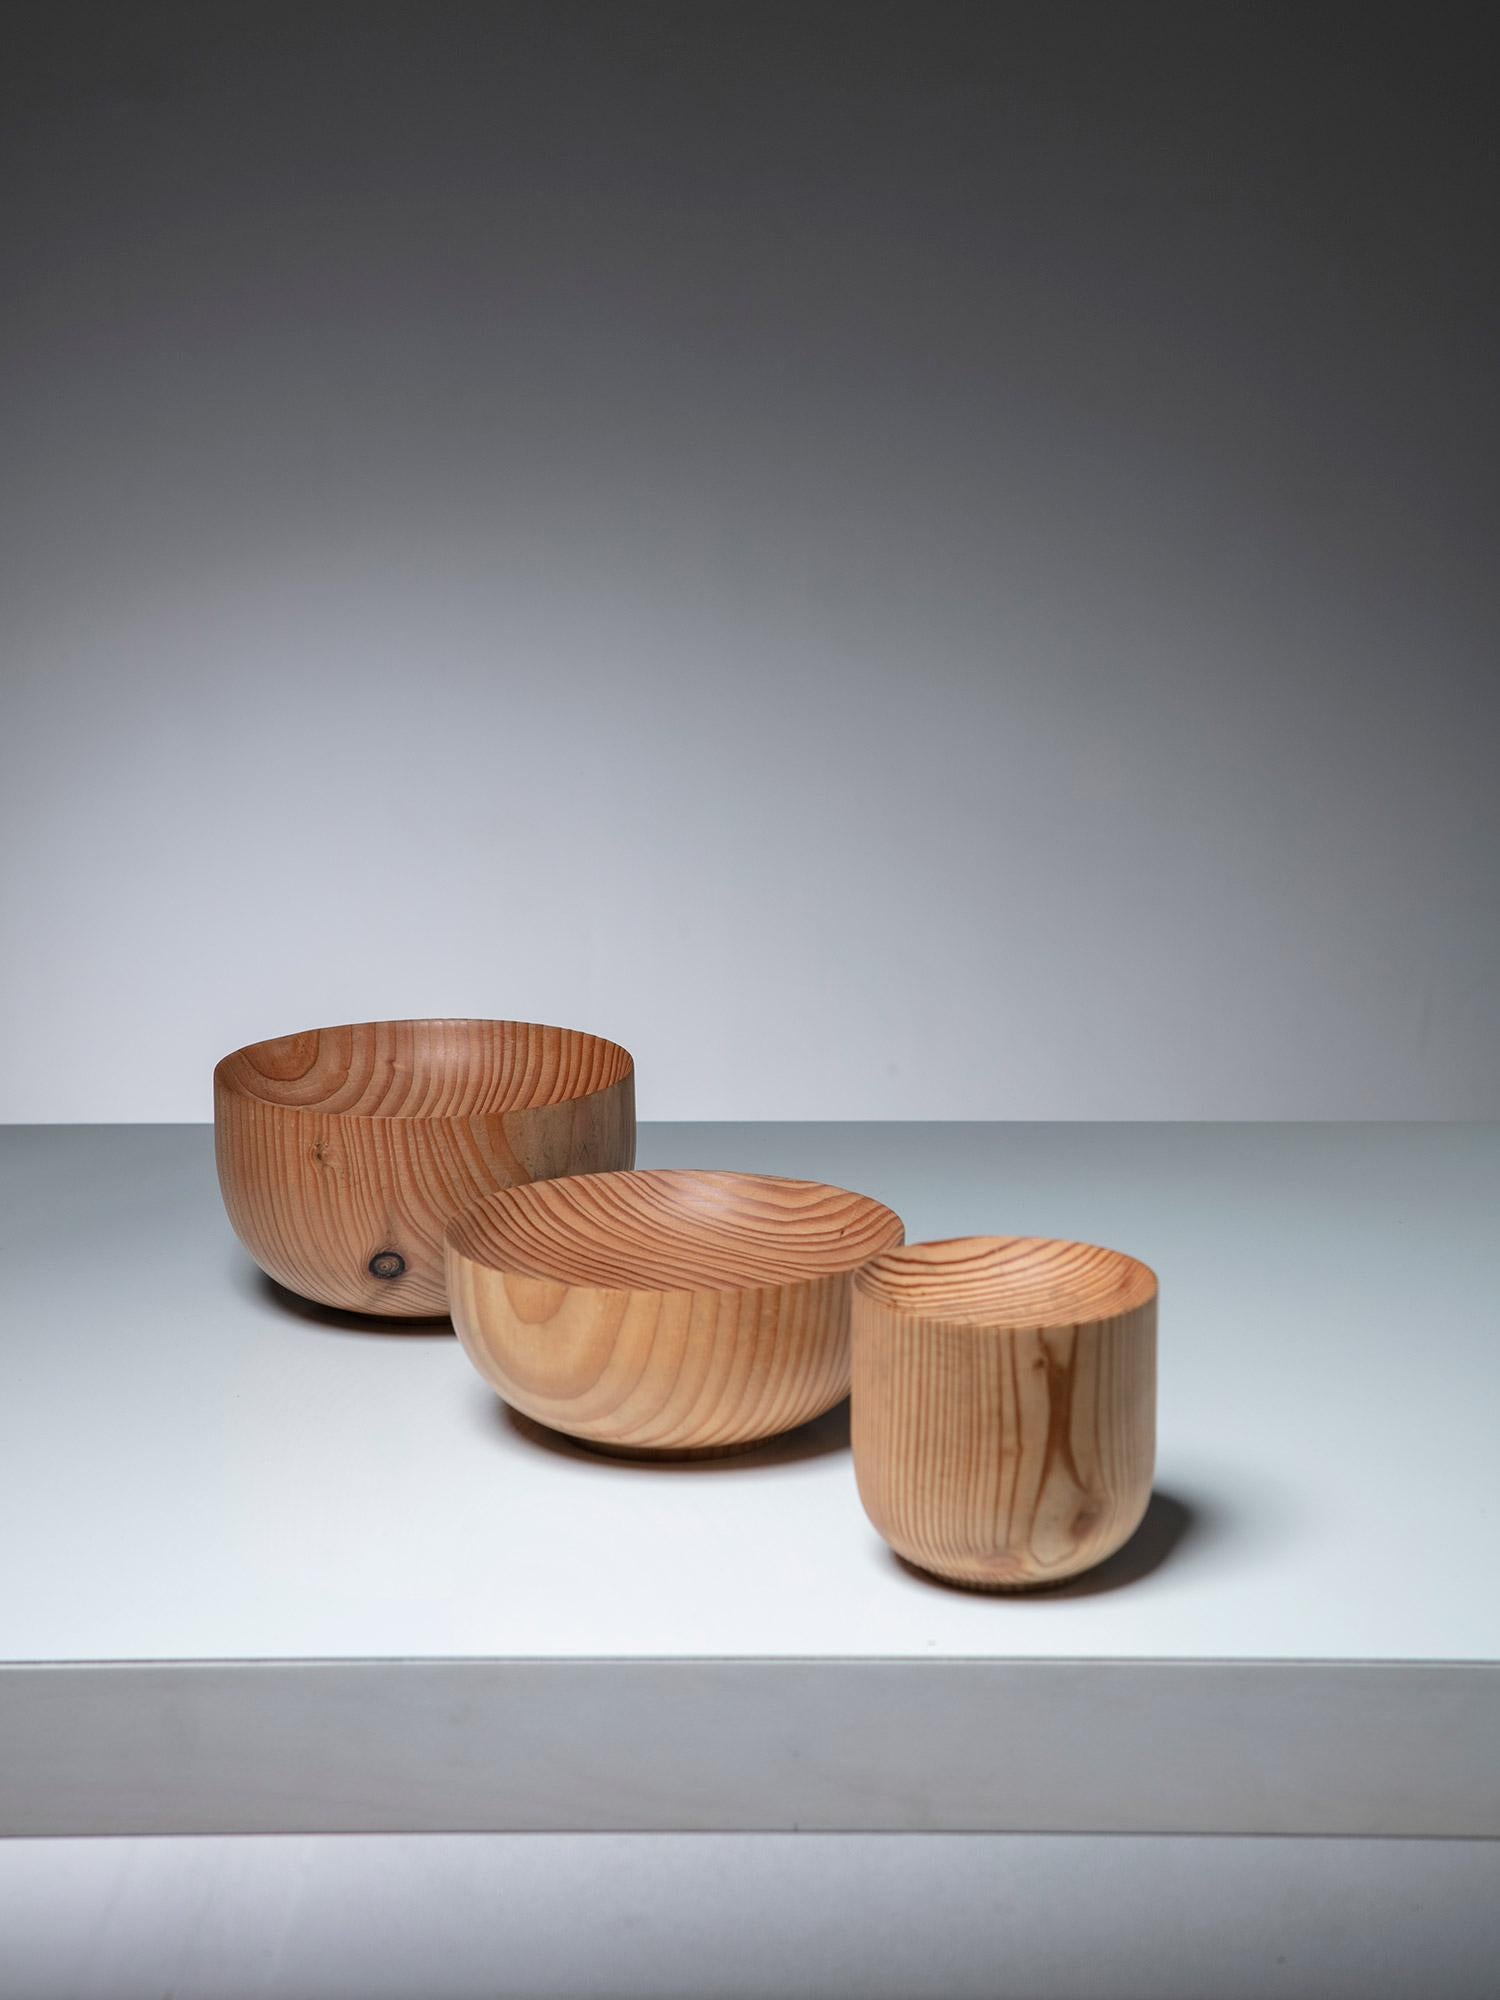 Italian Set of Three Solid Wood Bowls, Italy, 1970s For Sale